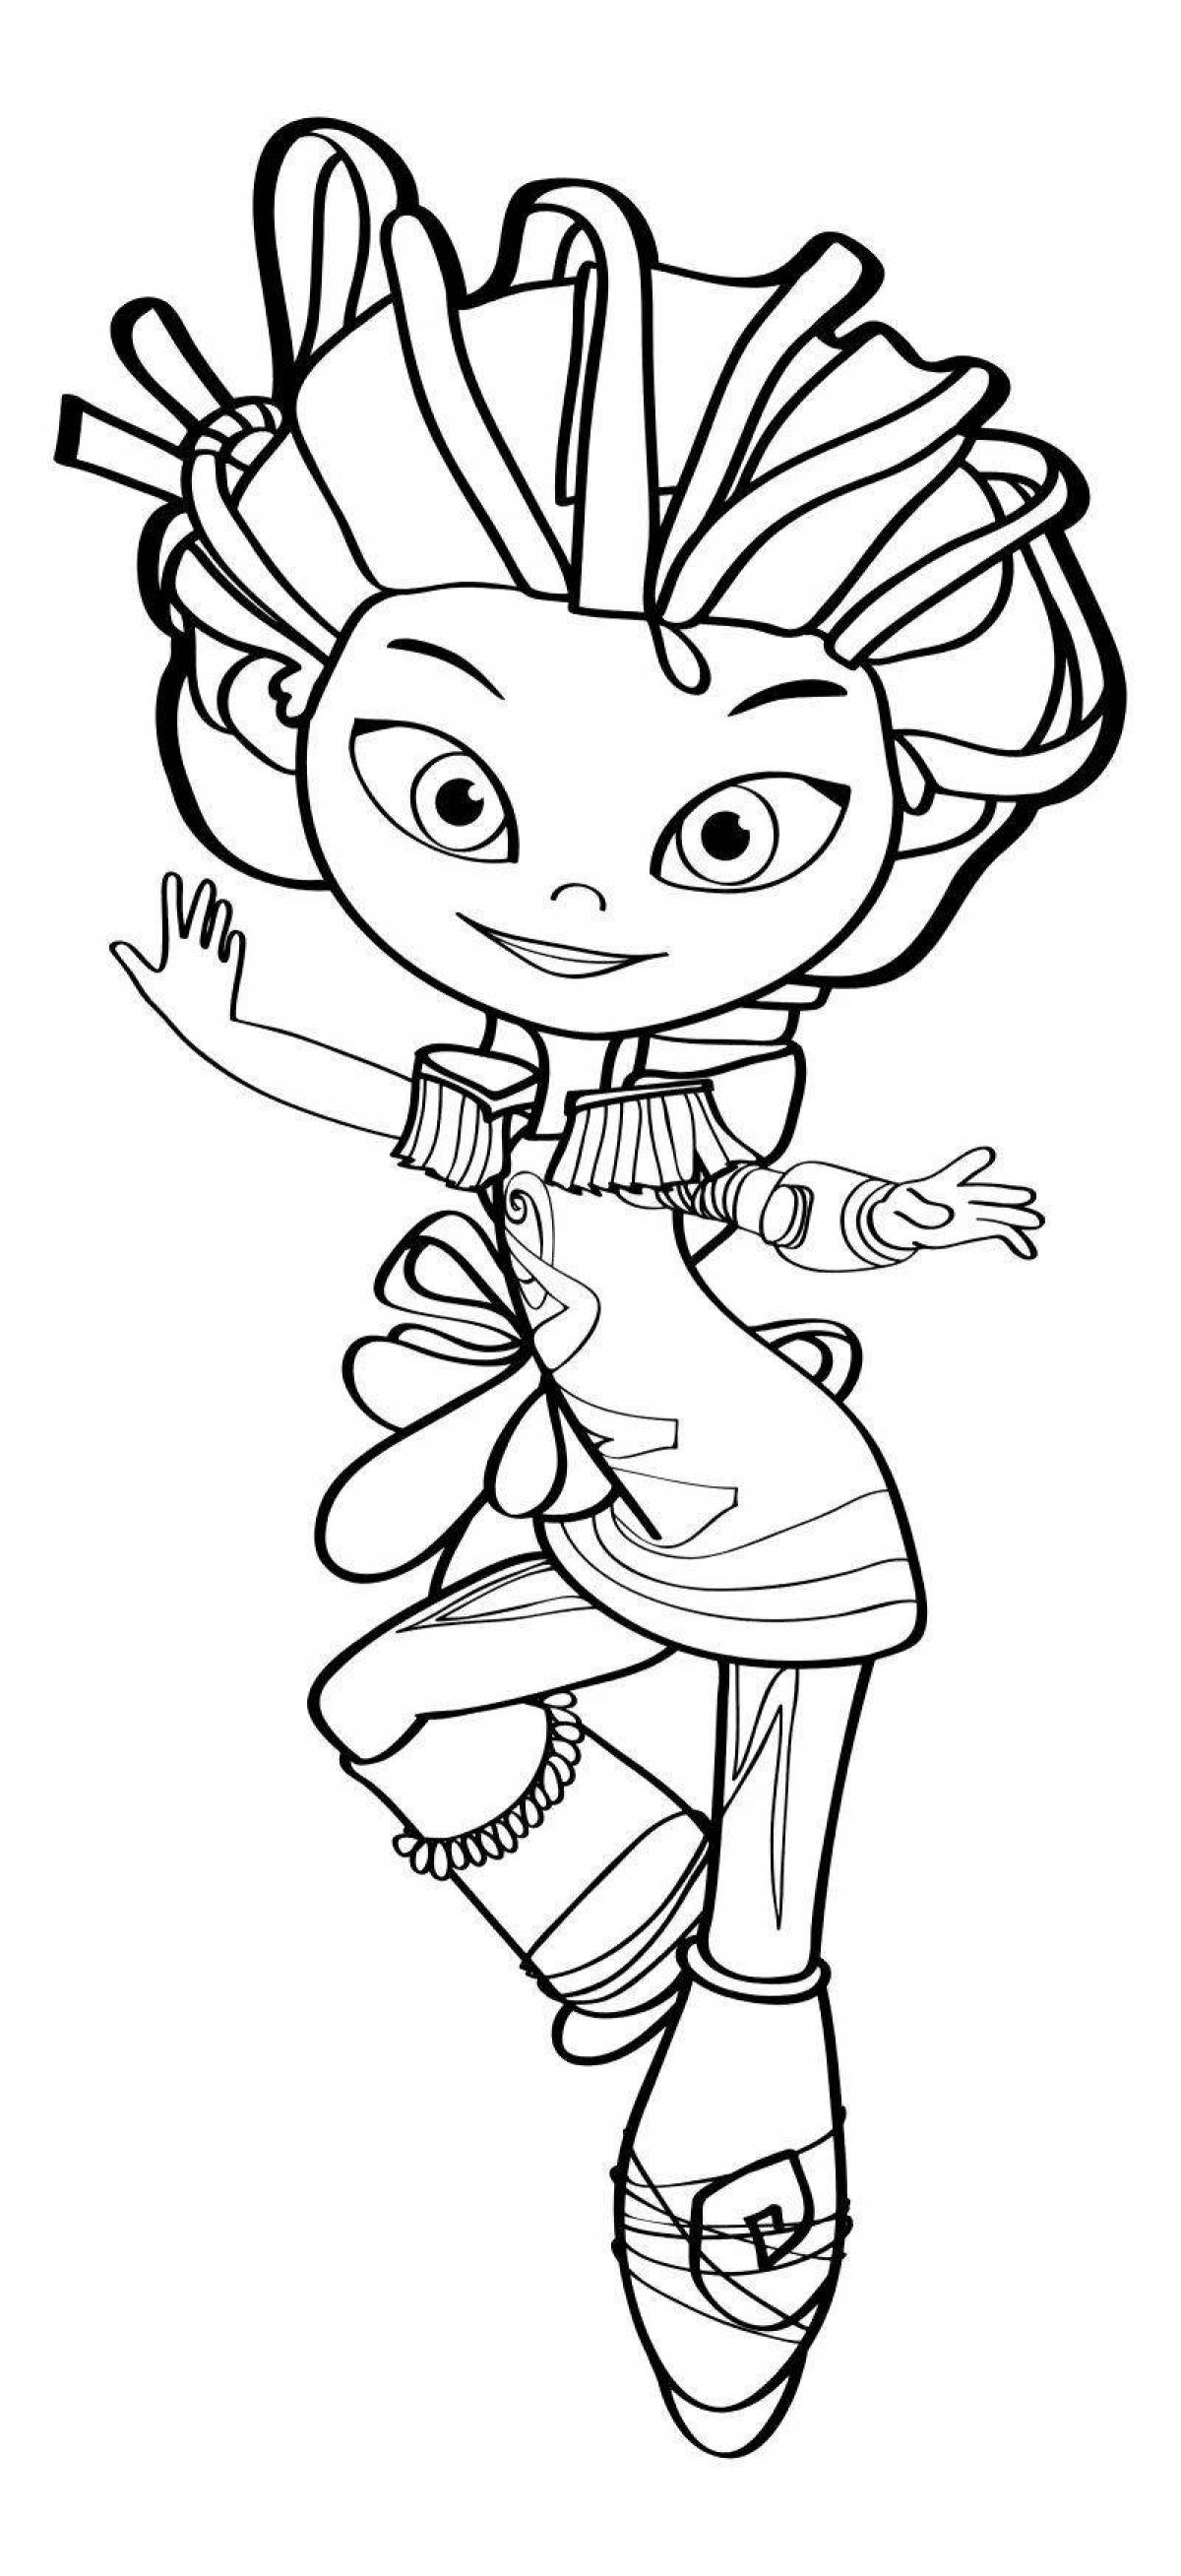 Exquisite coloring page turn on fairy patrol